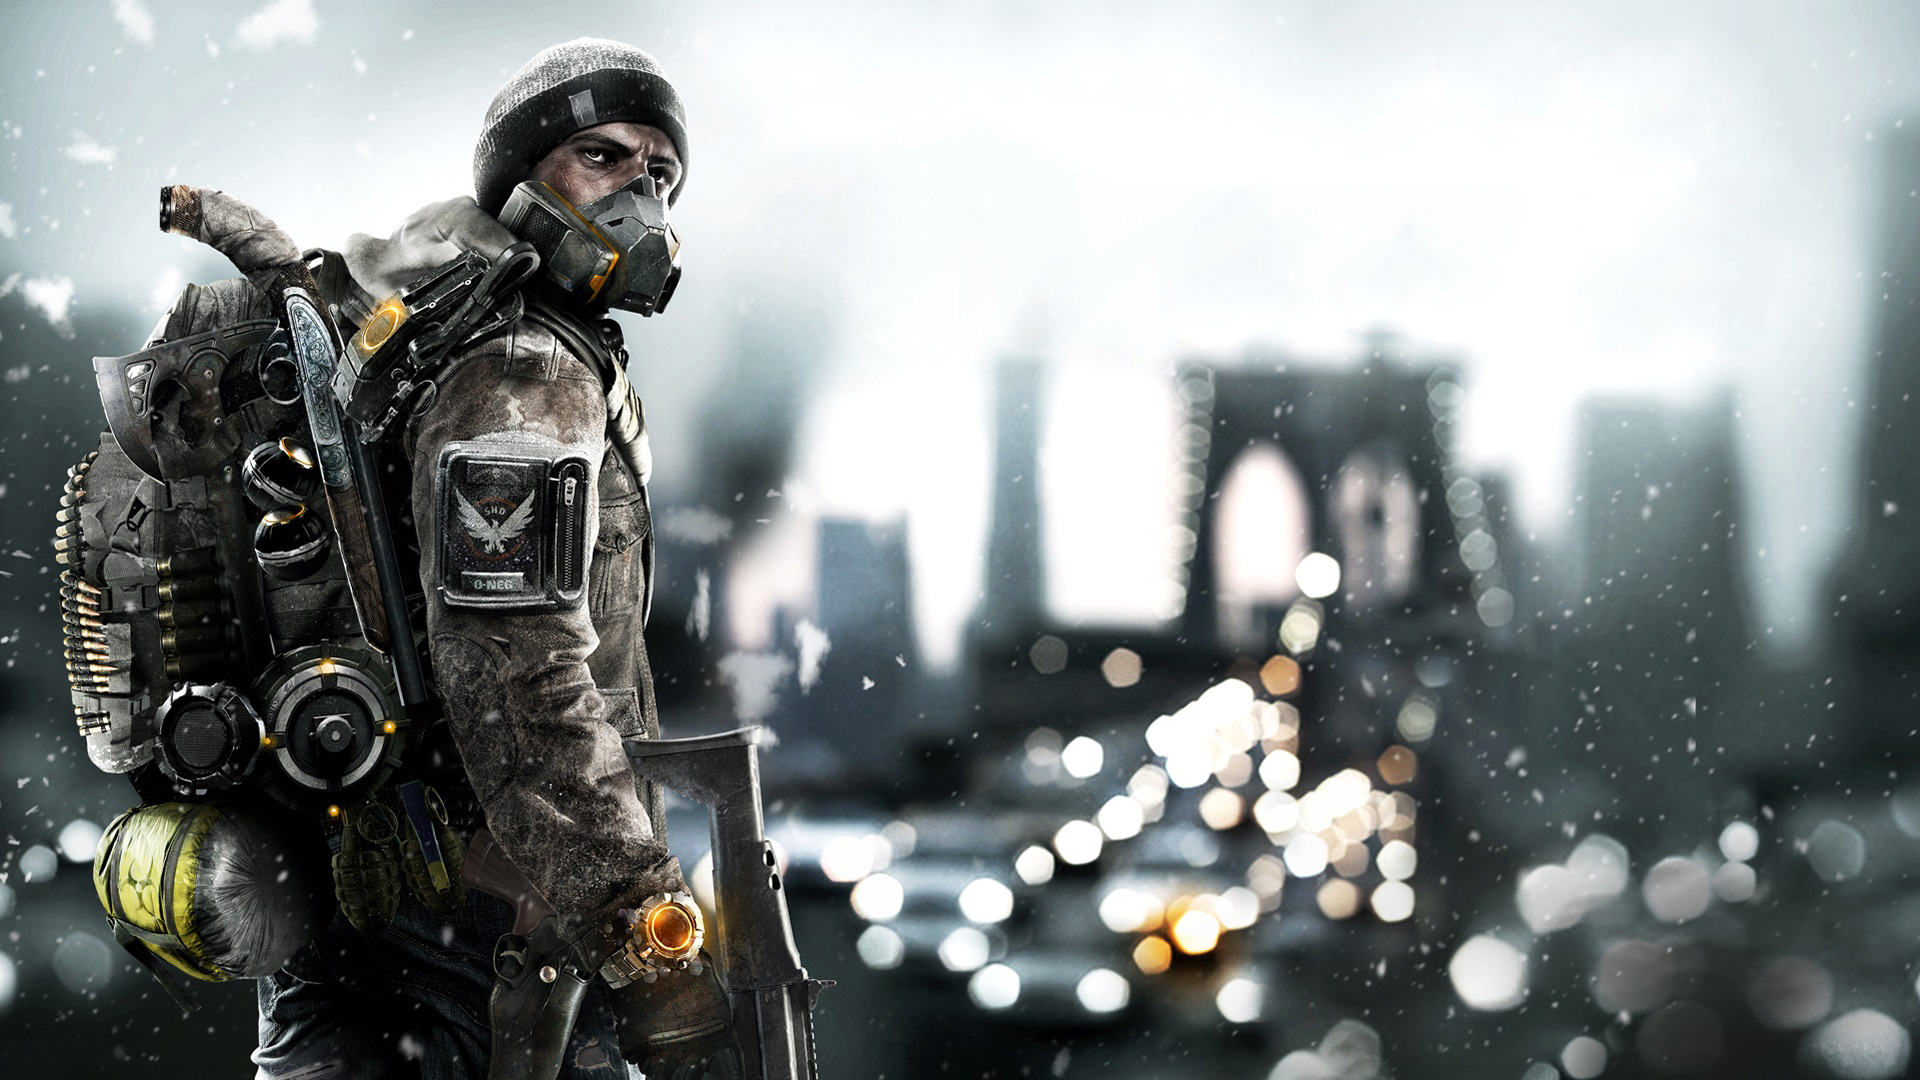 Tom Clancy’s The Division Wallpapers HD  InspirationSeek.com